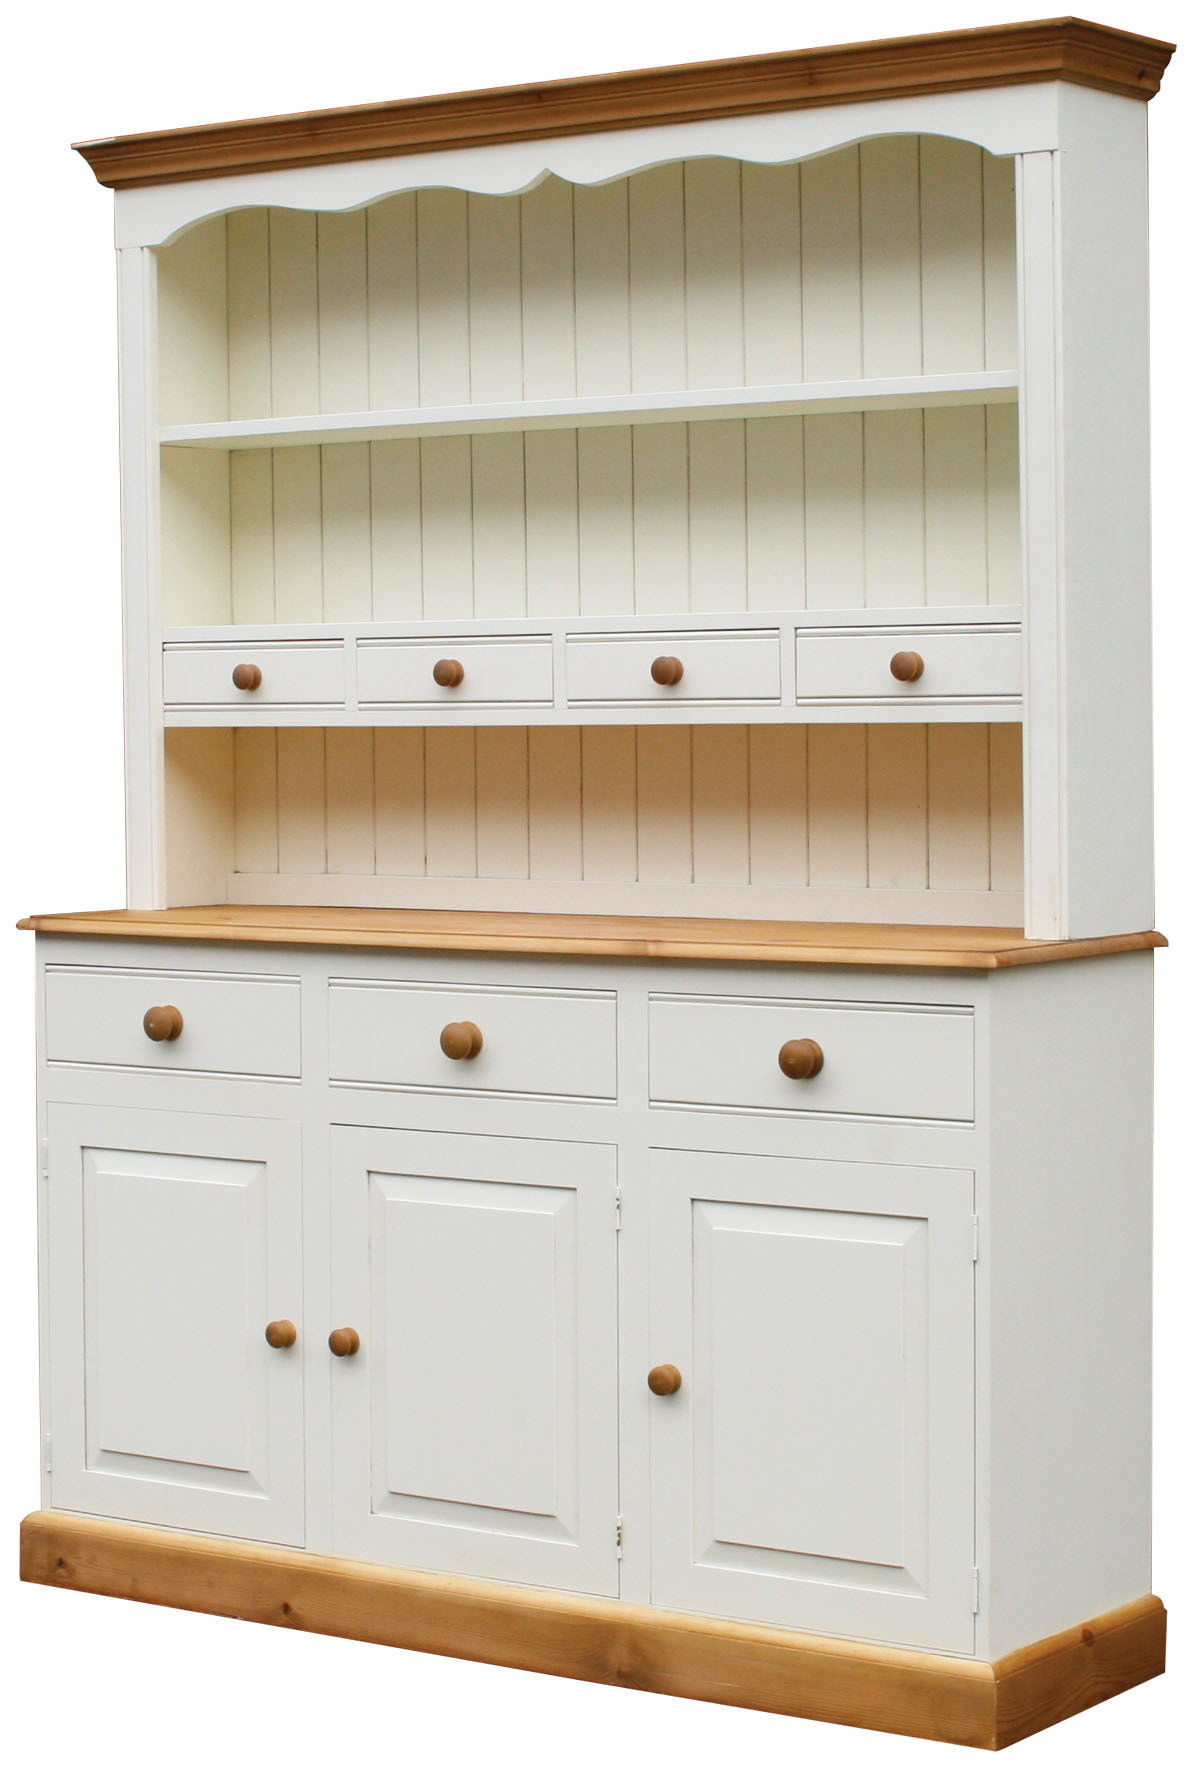 Traditional Kitchen Dresser with Spice Drawers in top